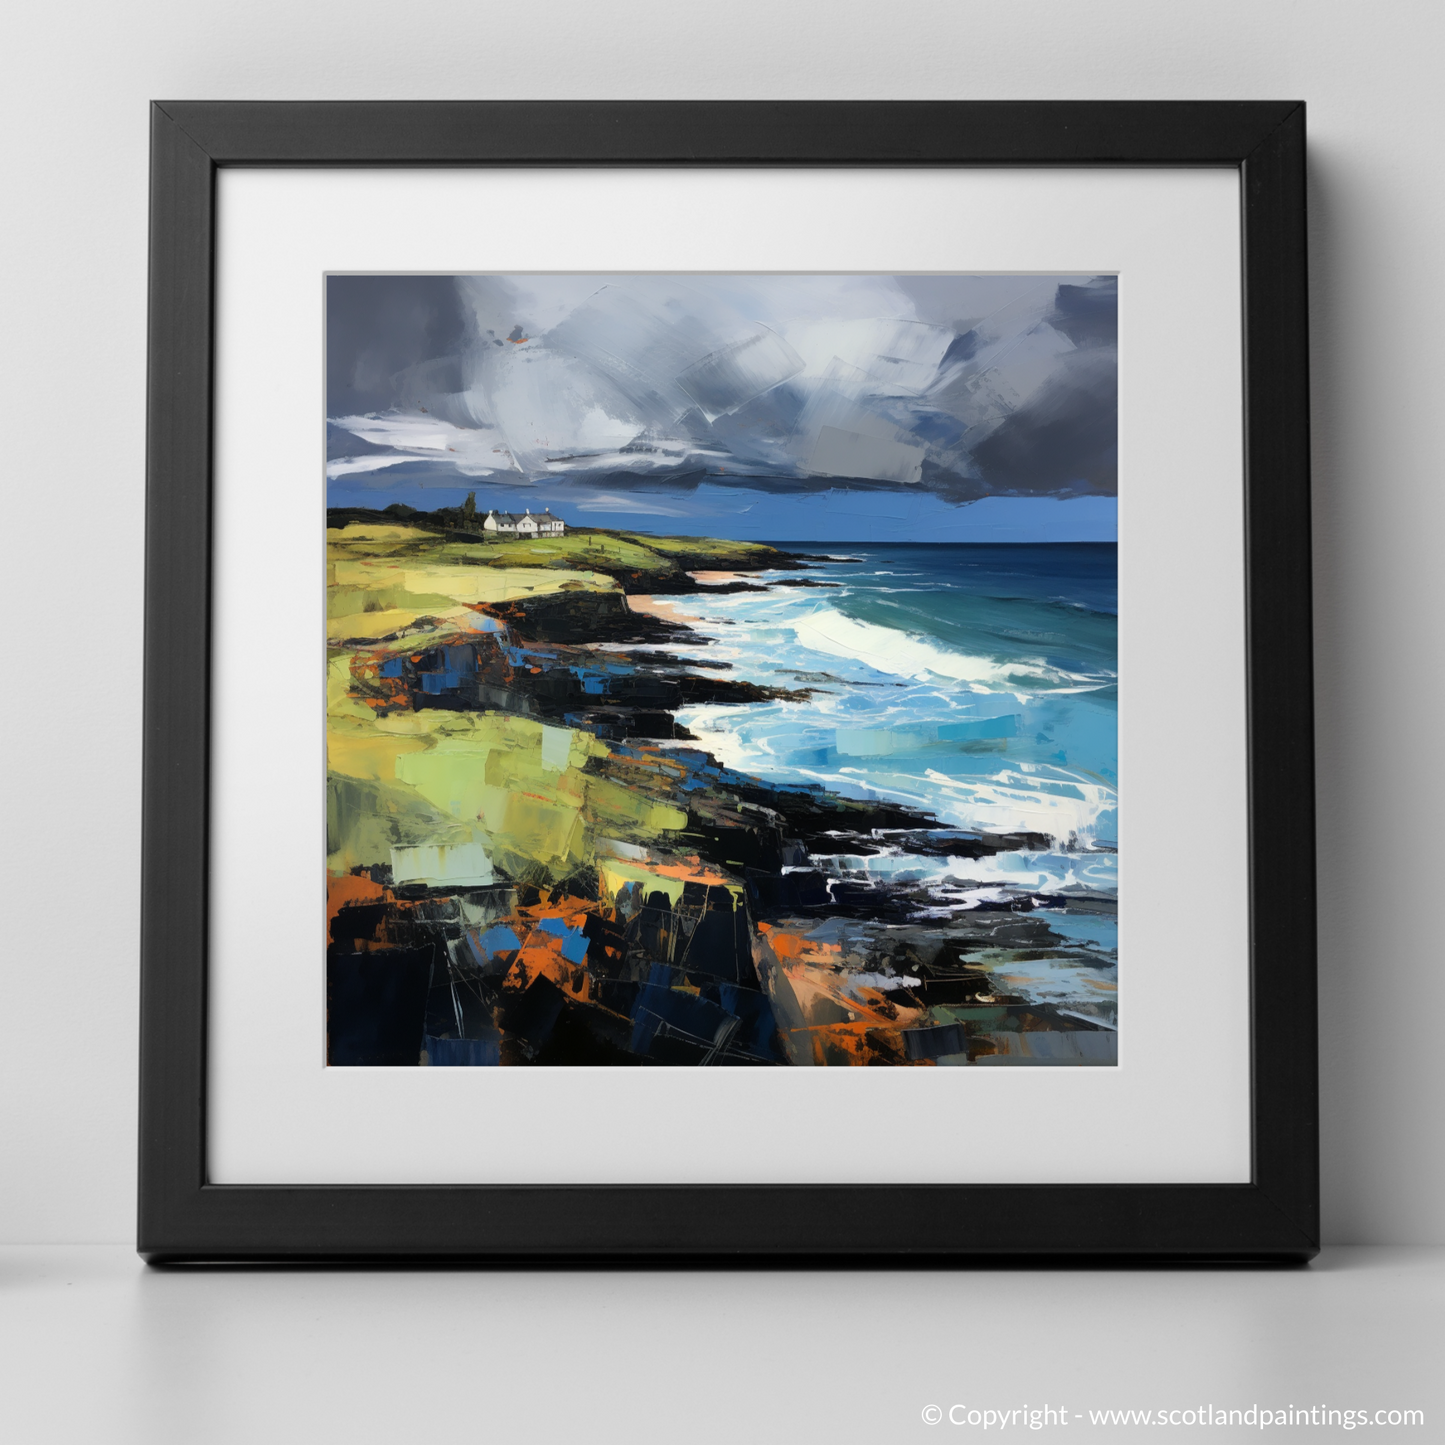 Art Print of Coldingham Bay with a stormy sky with a black frame